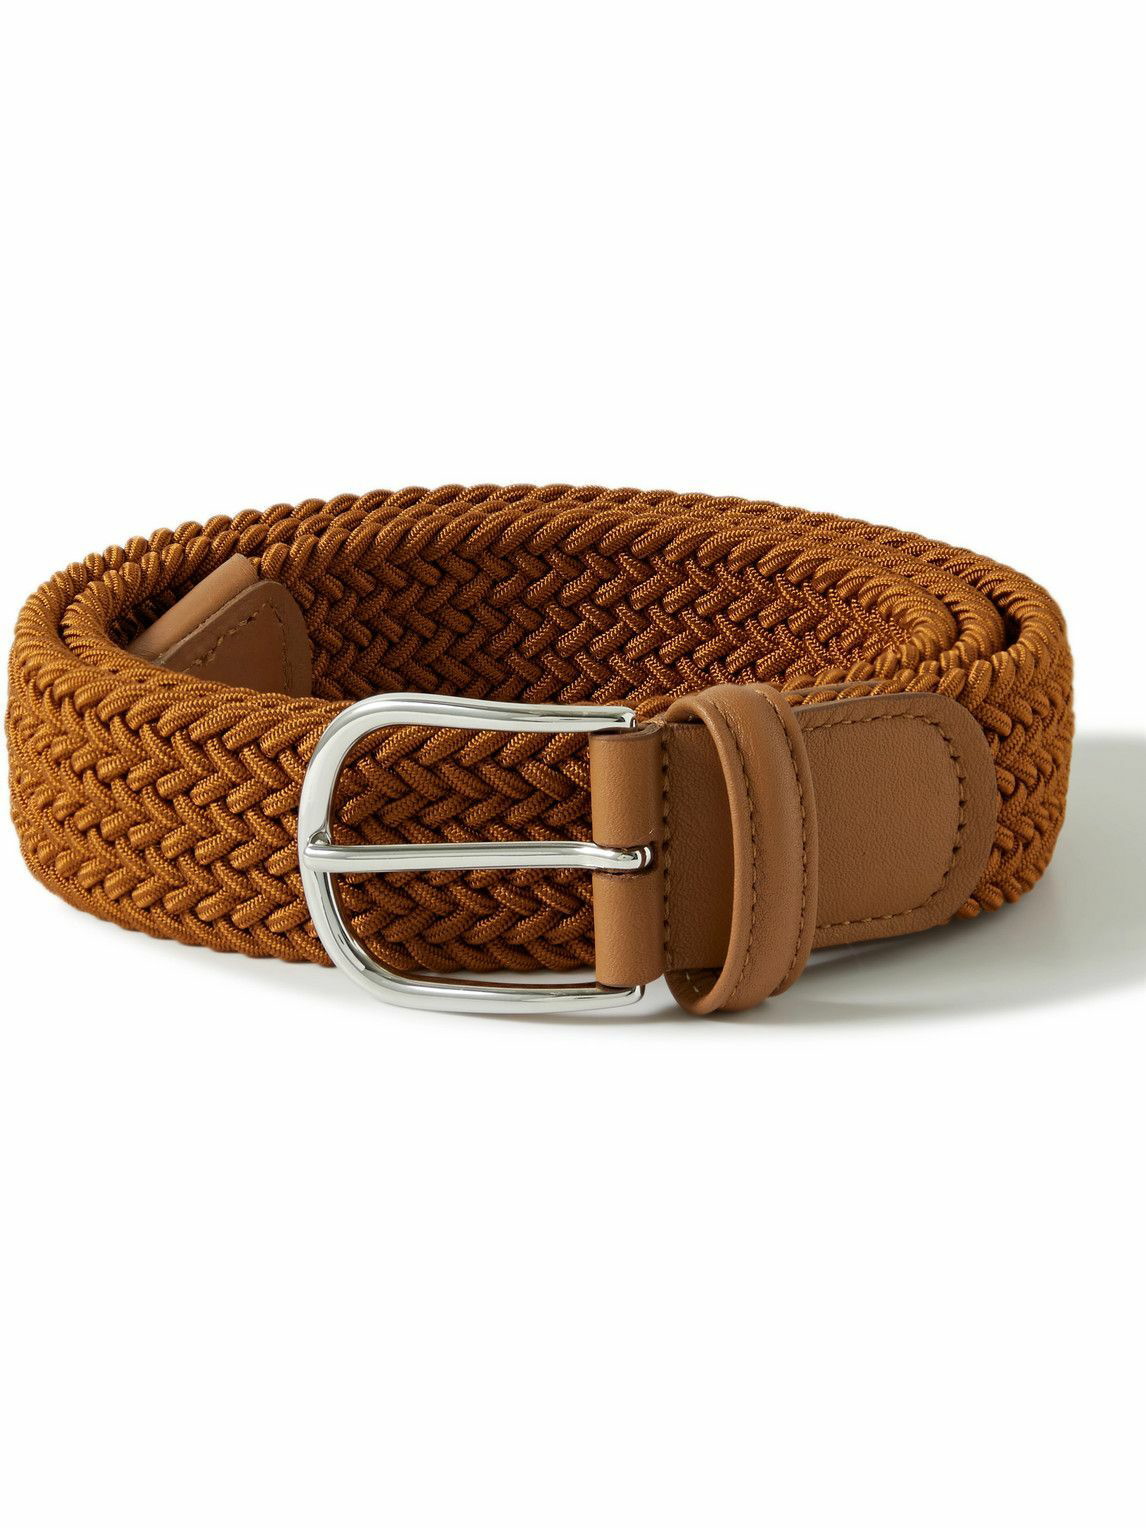 Anderson's Leather 3.5cm Woven Belt - Brown